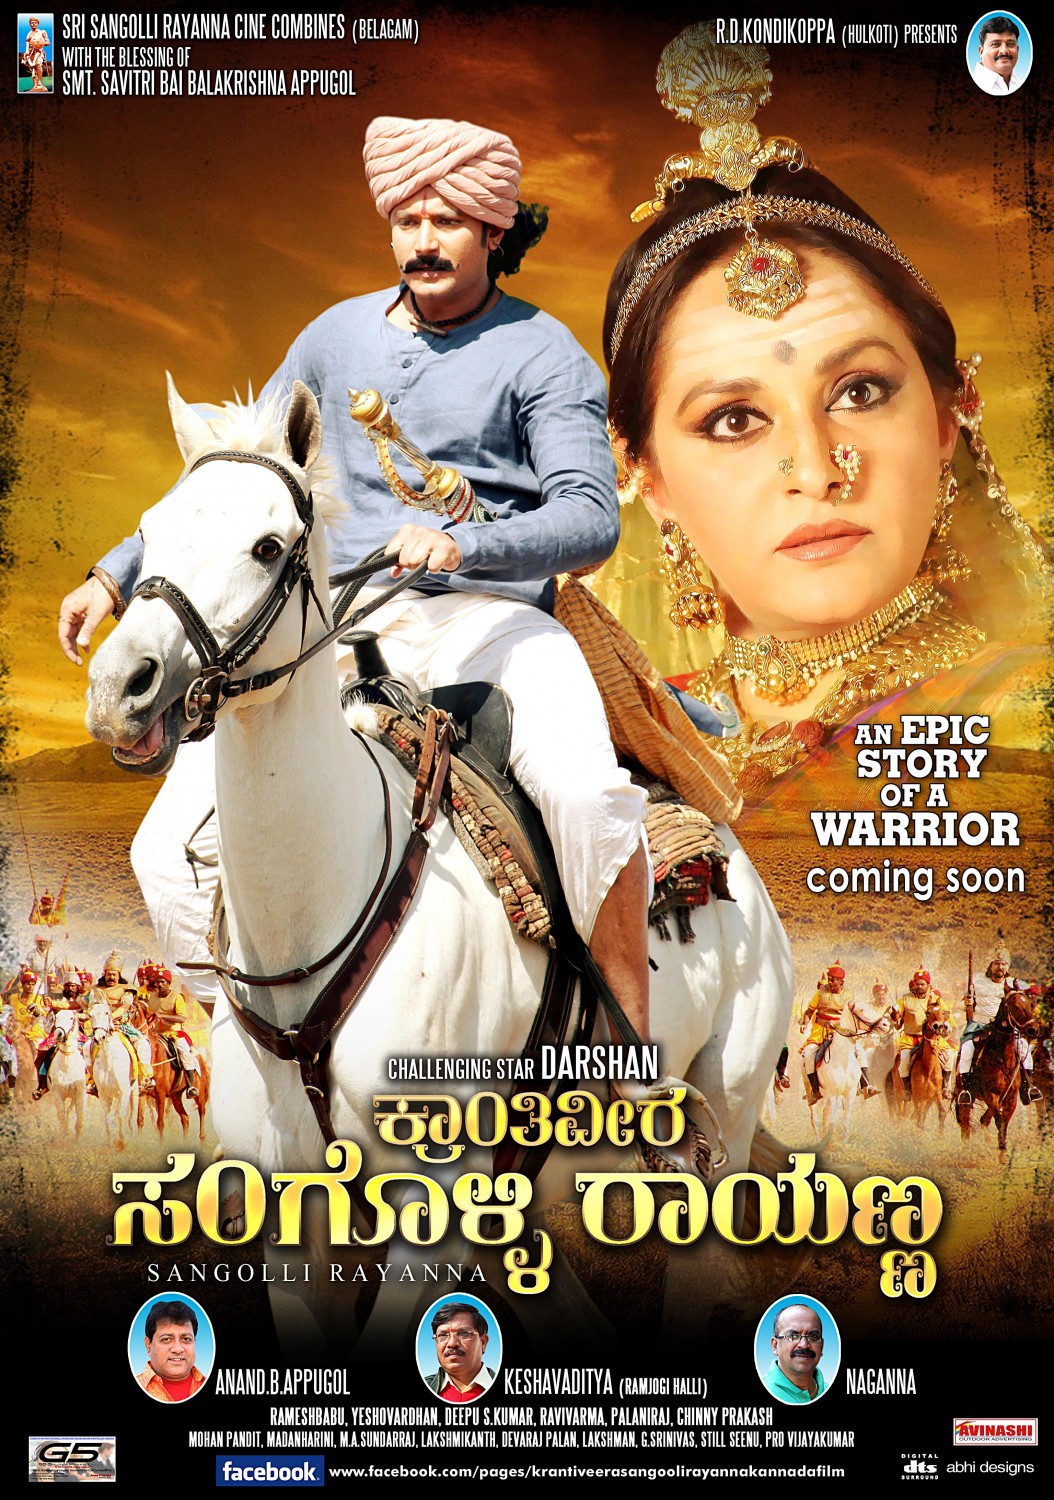 Extra Large Movie Poster Image for Sangolli Rayanna (#35 of 79)